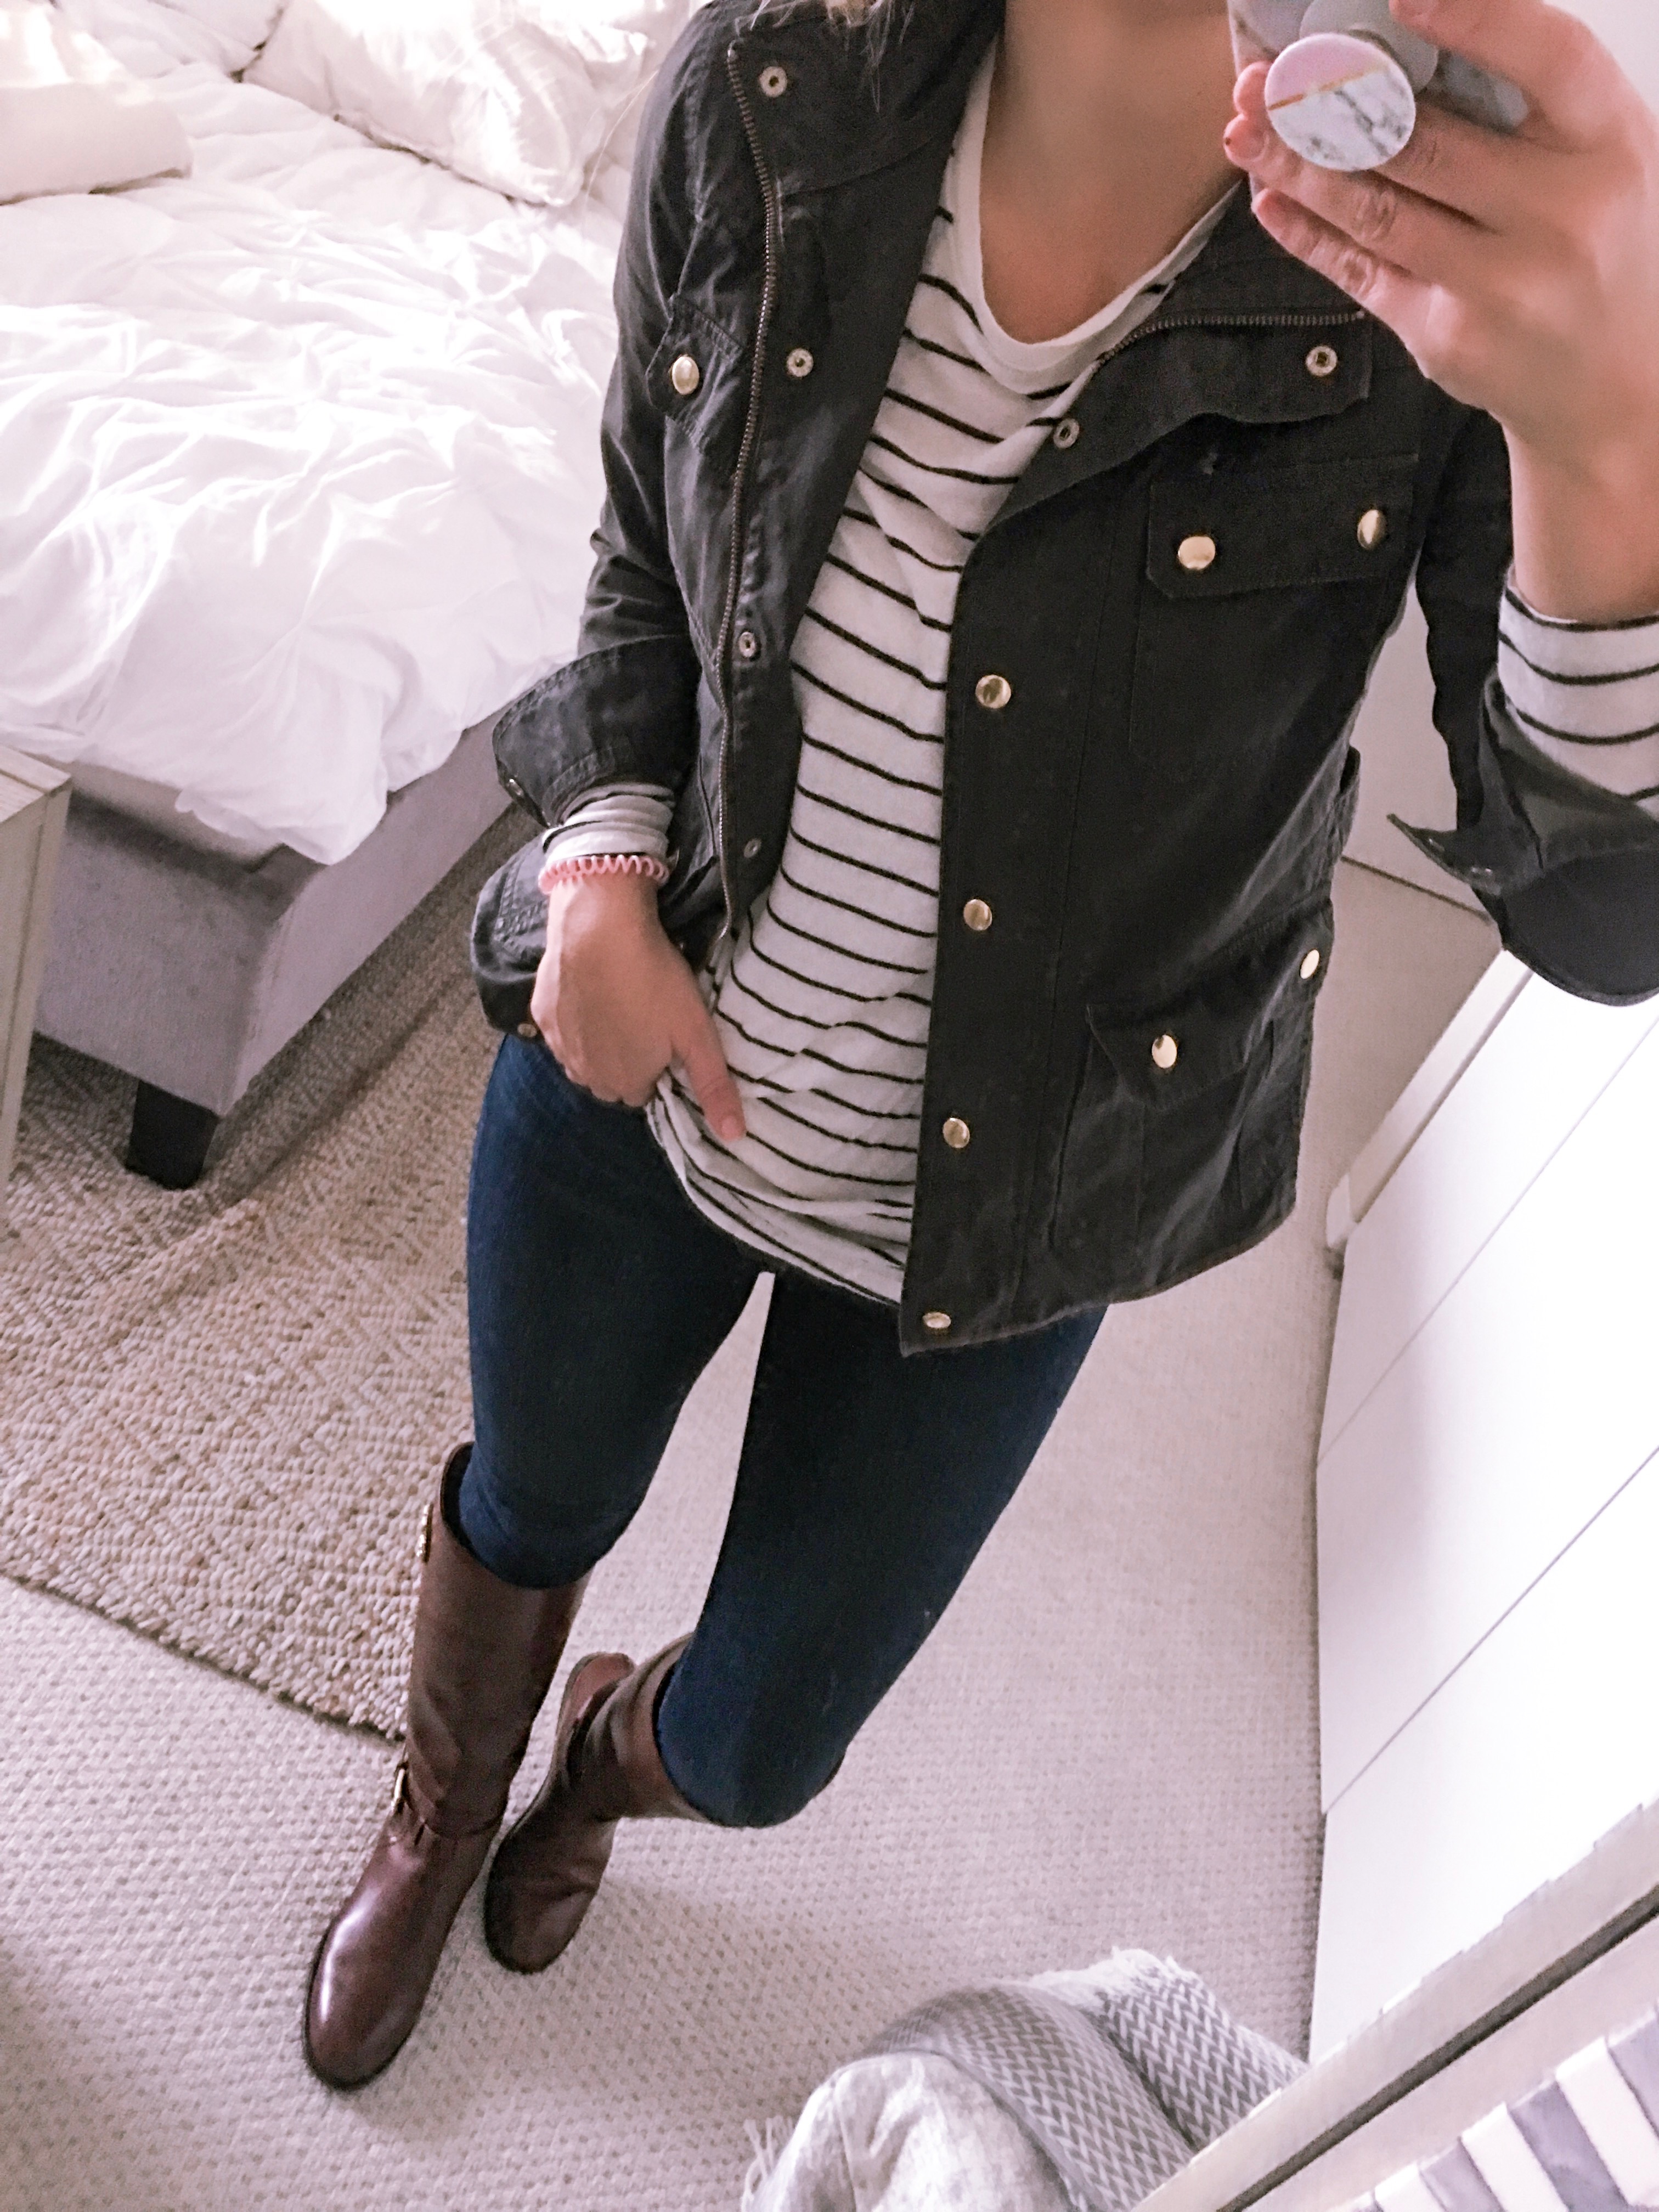 j.crew downtown field jacket and a striped tee